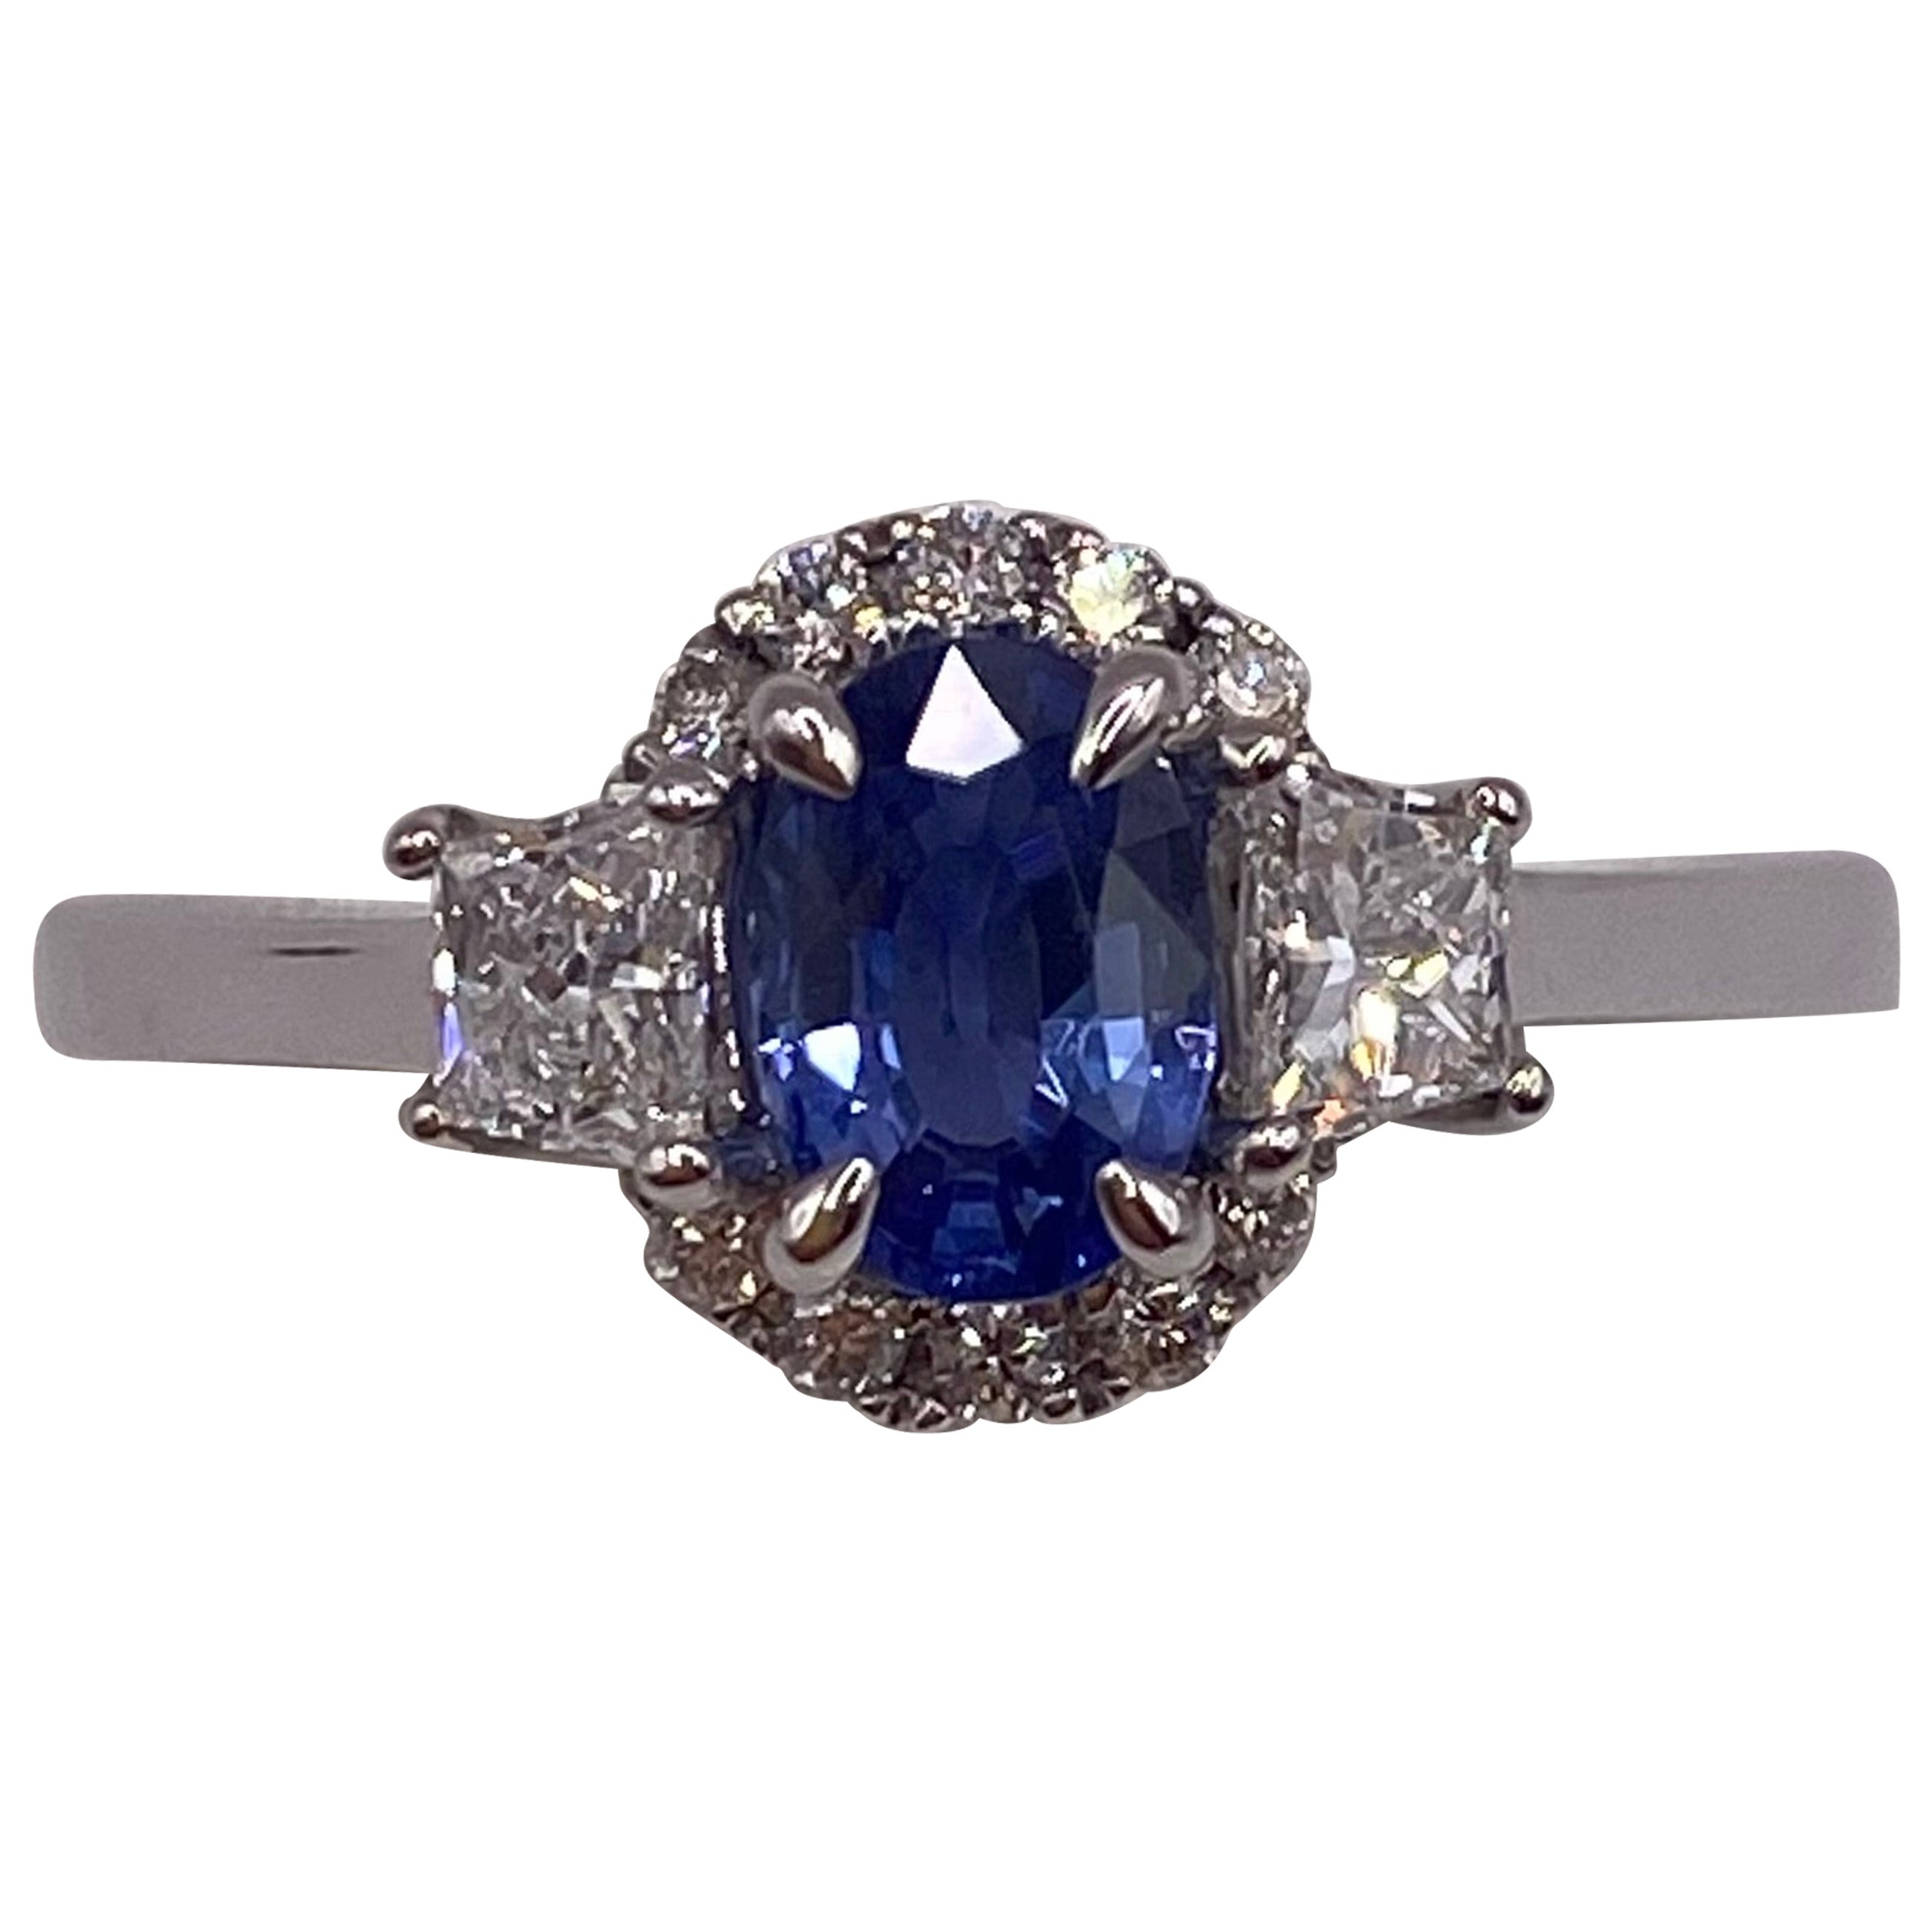 1.21ctw Oval Sapphire & Trapezoid Diamond Ring in 18KT White Gold